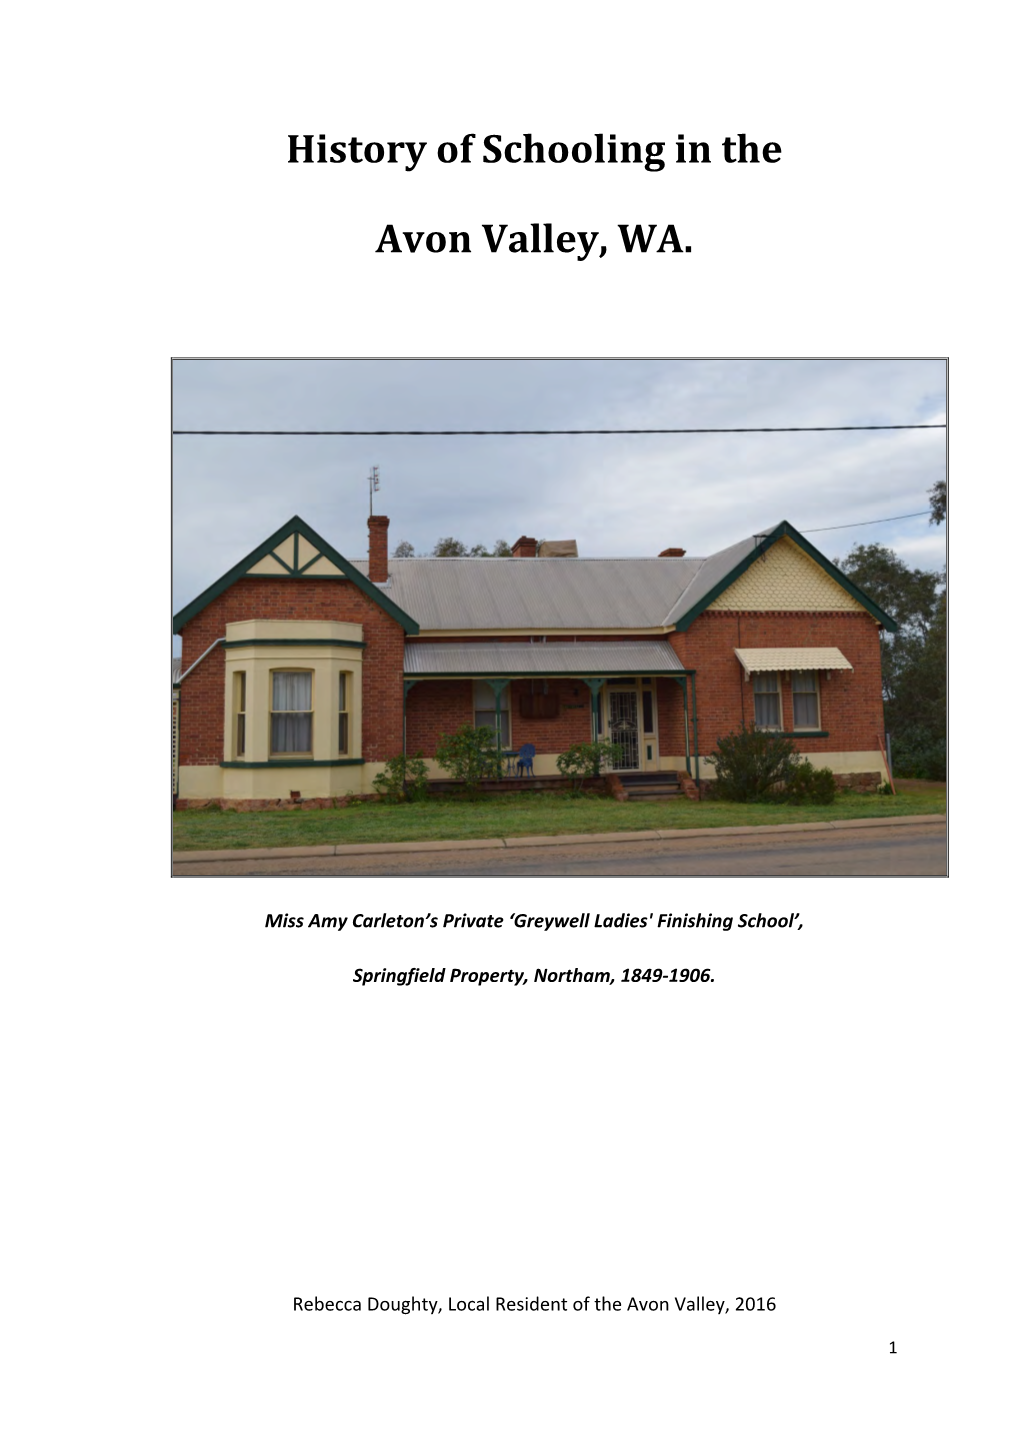 History of Schooling in the Avon Valley, Western Australia